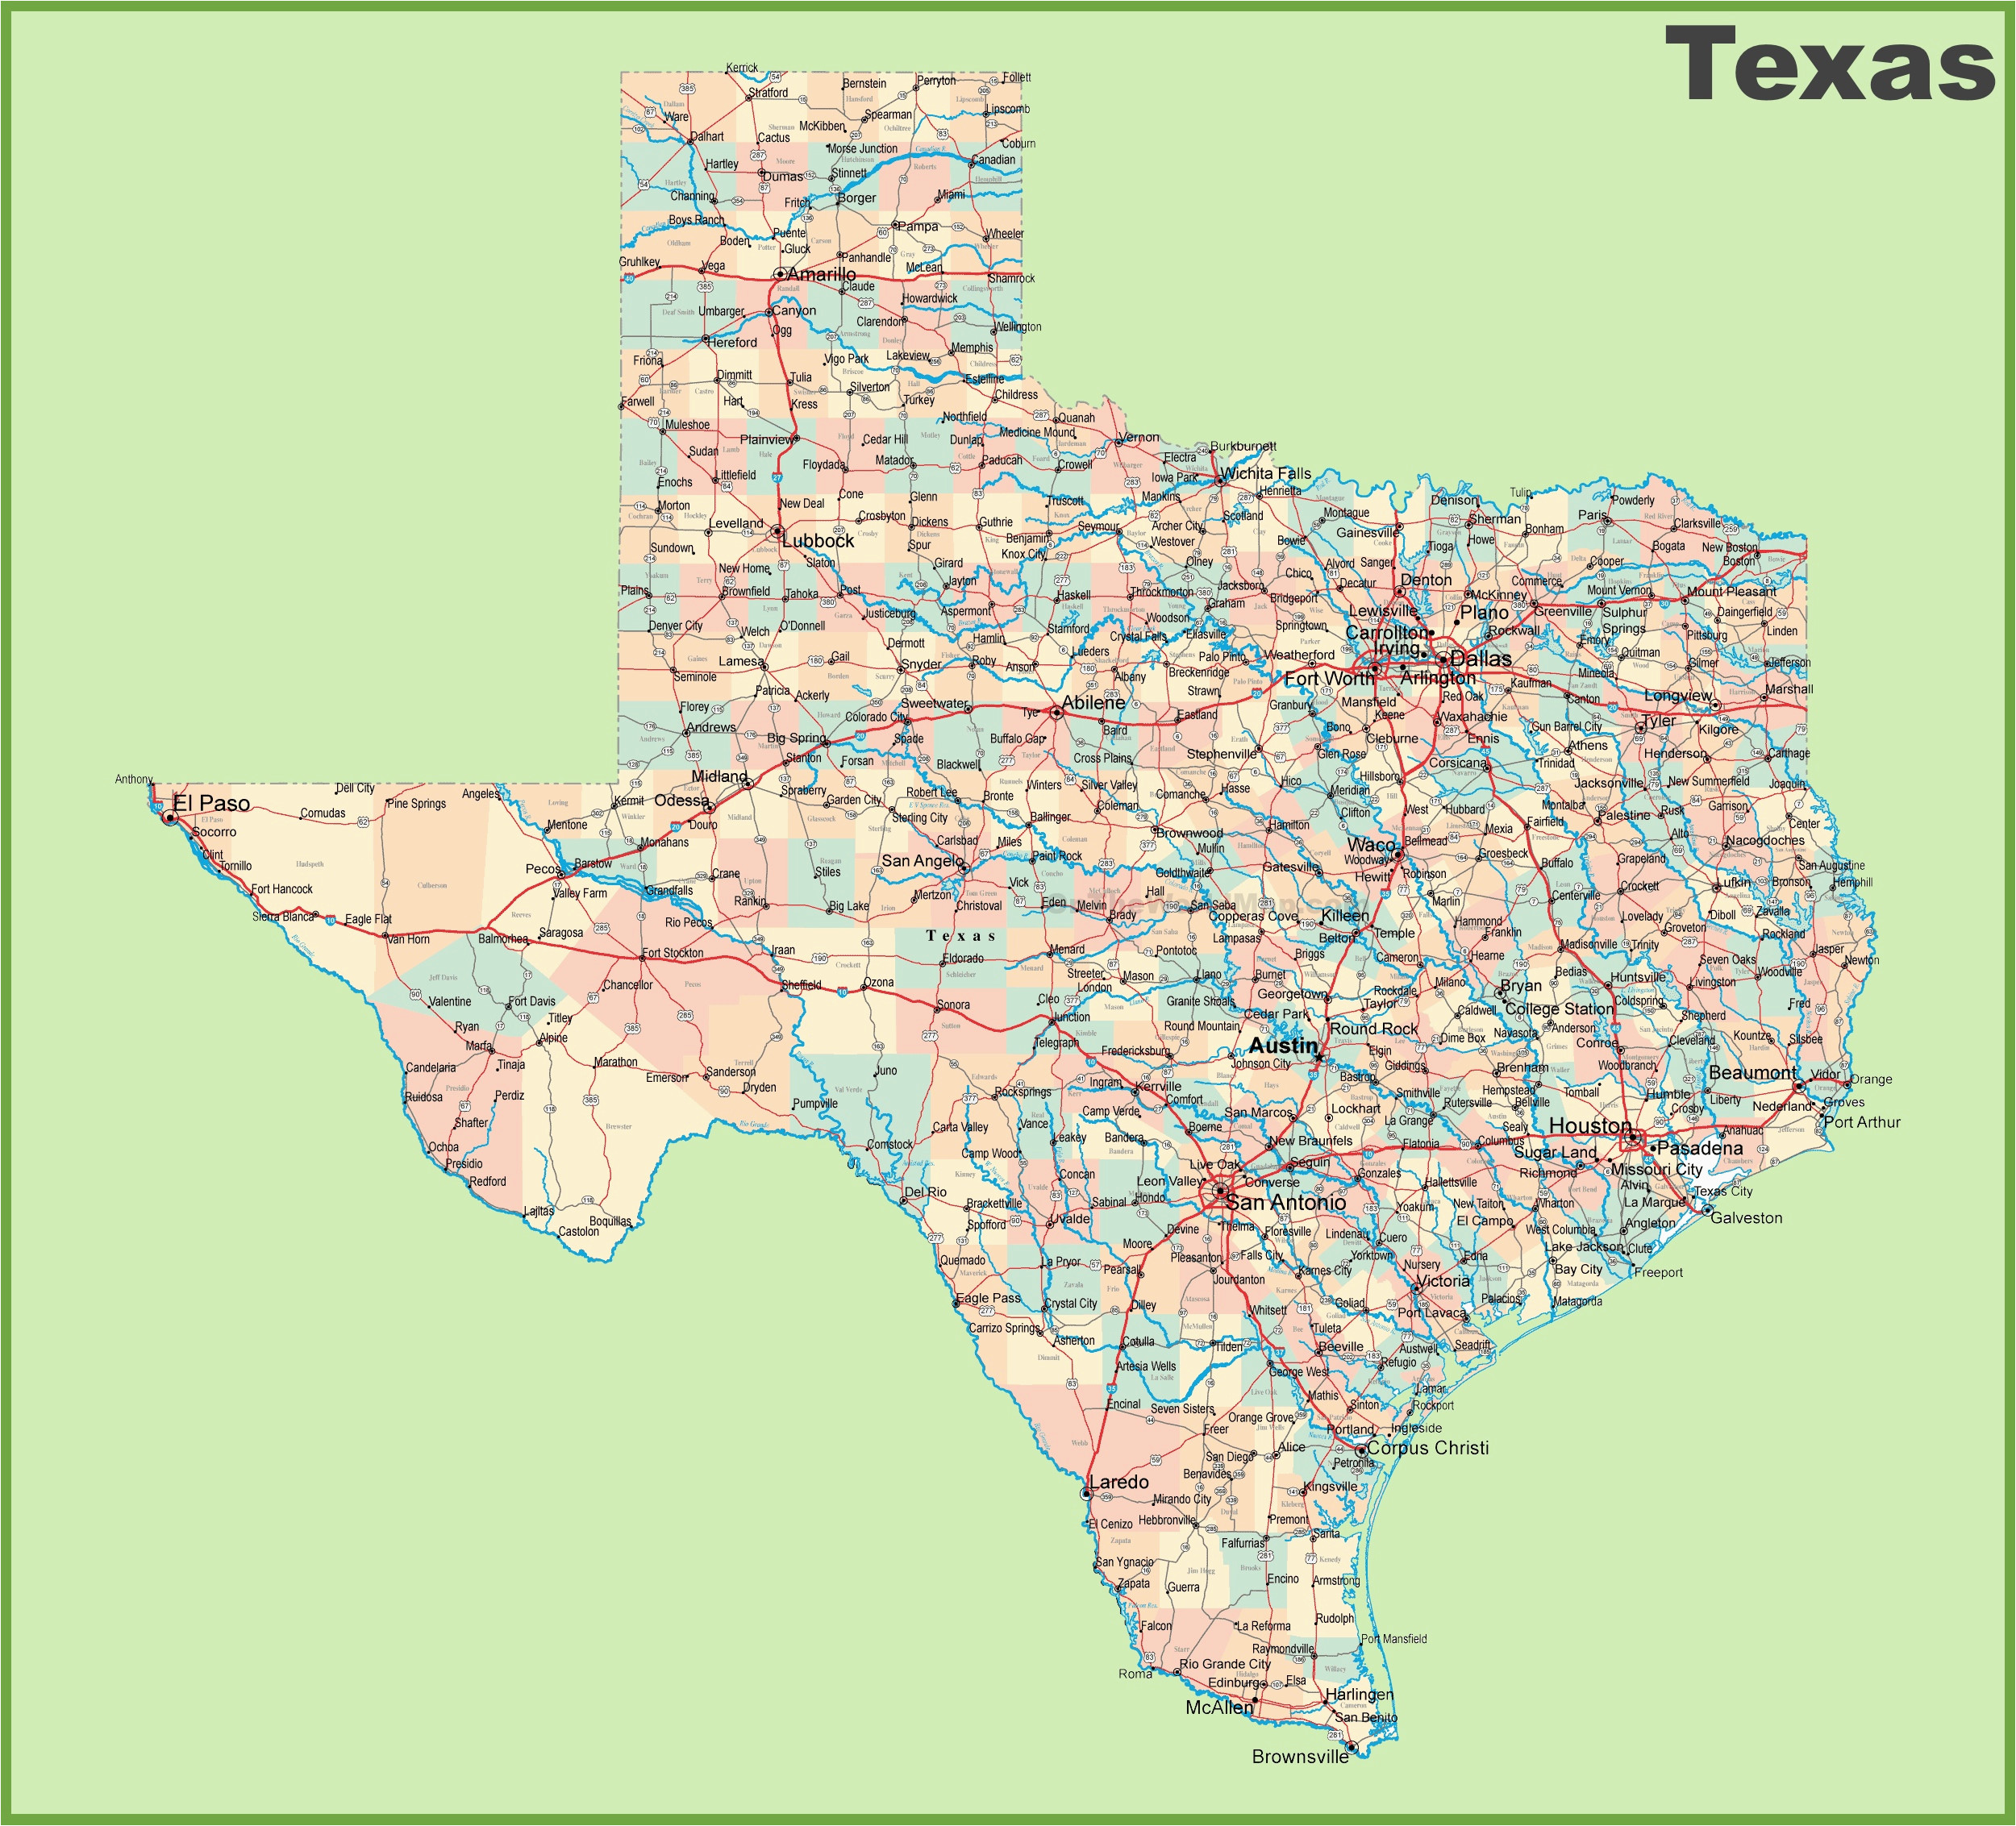 State Map Of Texas Showing Cities Road Map Of Texas with Cities